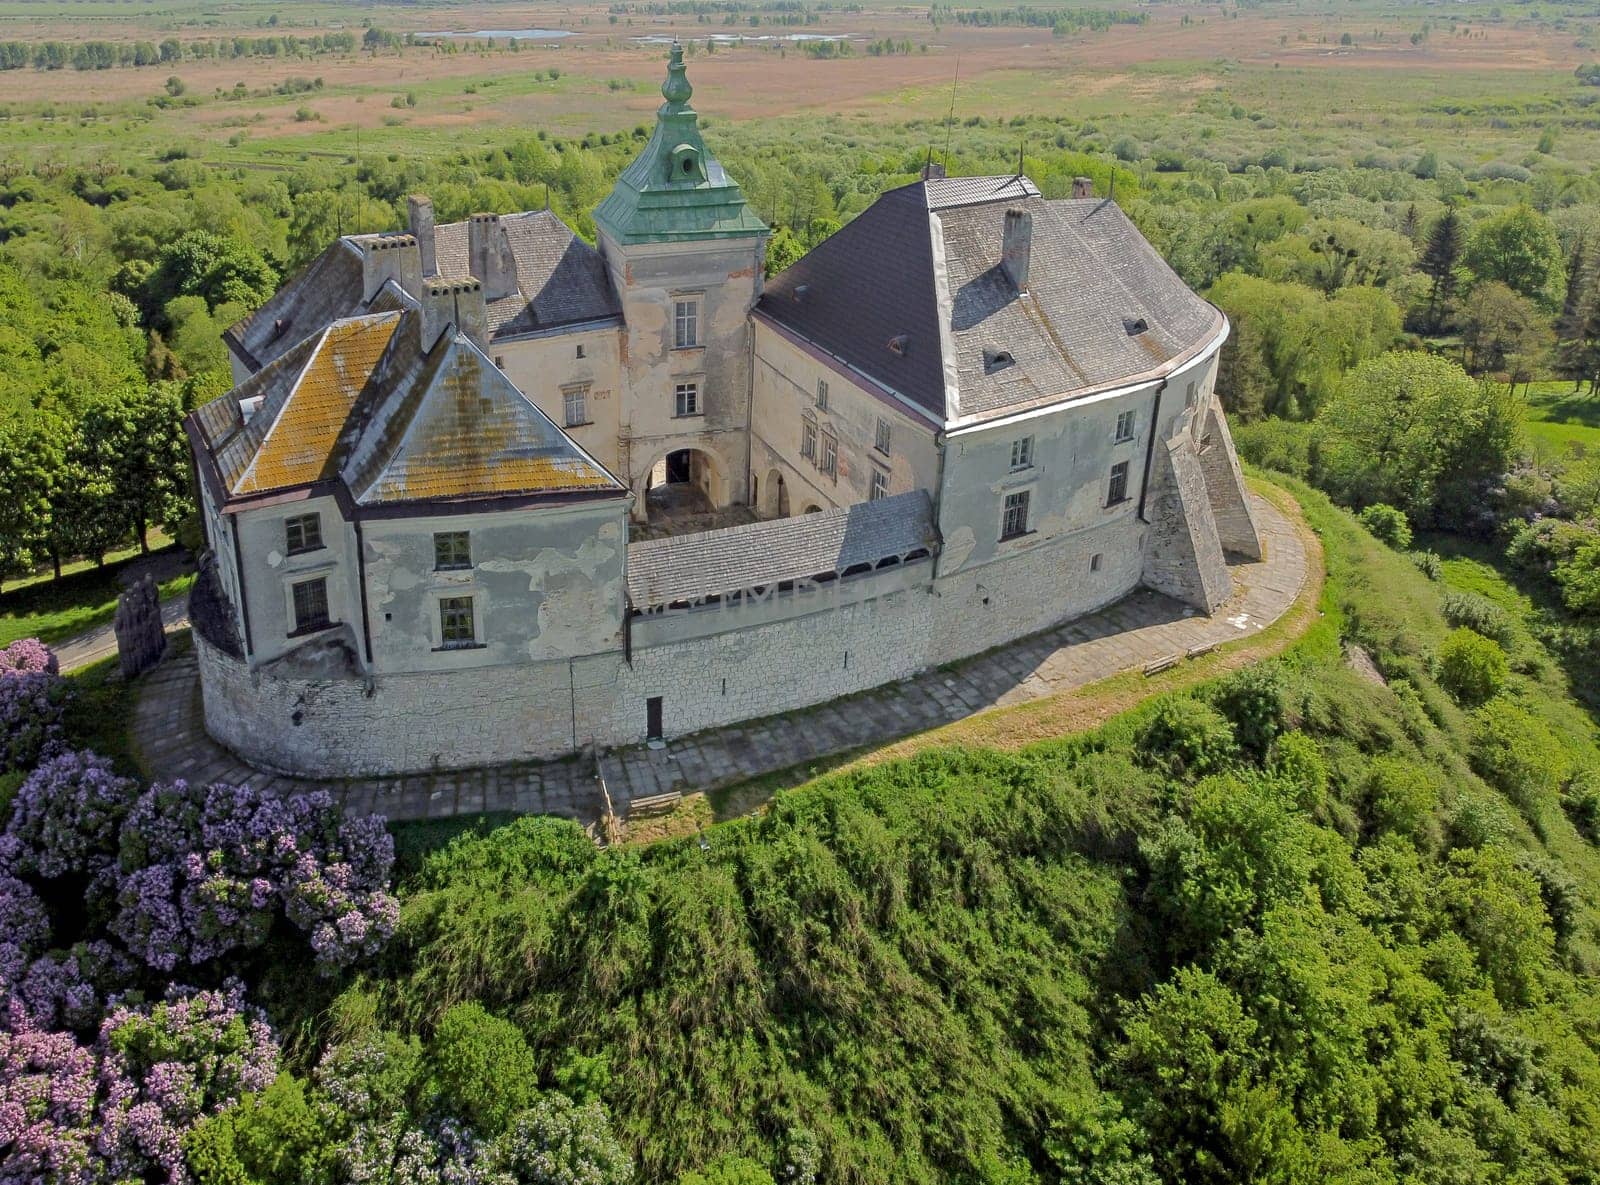 History of Ukraine. Tourism. Aerial view of the Olesky Castle. Very beautiful castle near Lviv. by aprilphoto